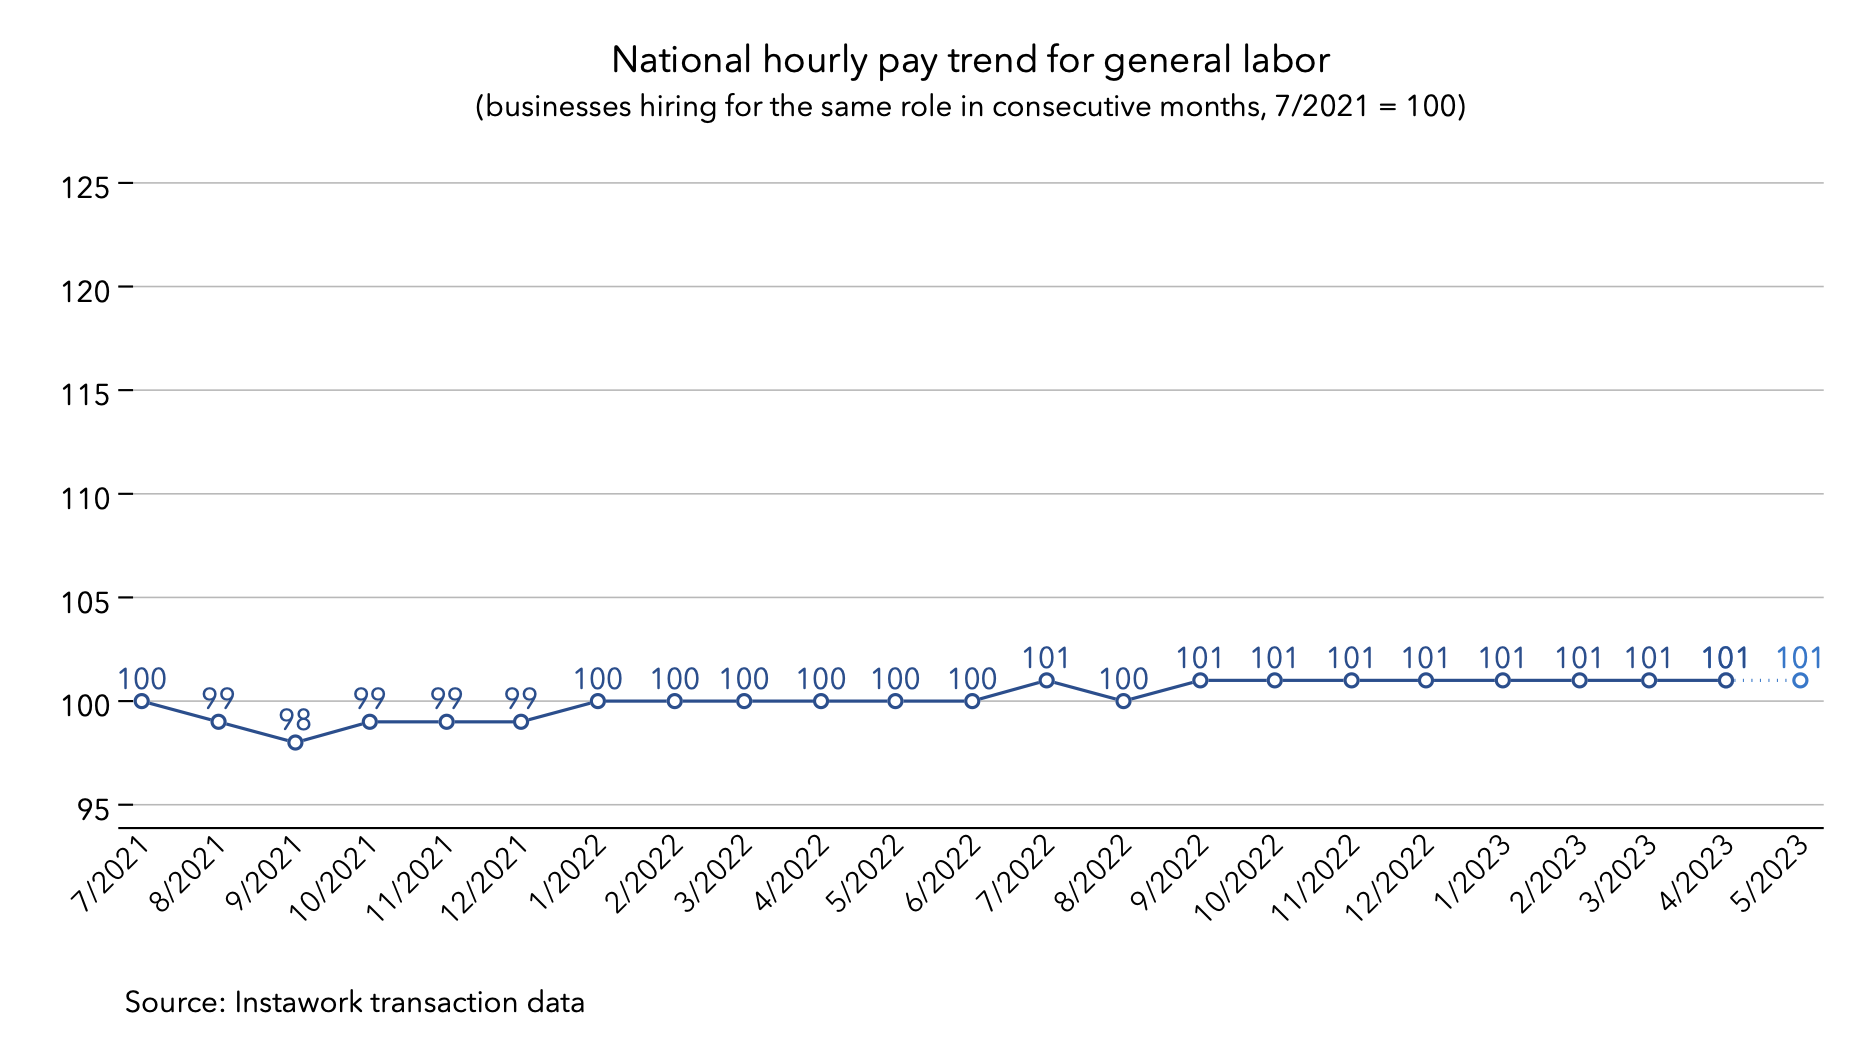 1 May 2023 pay trend for general labor